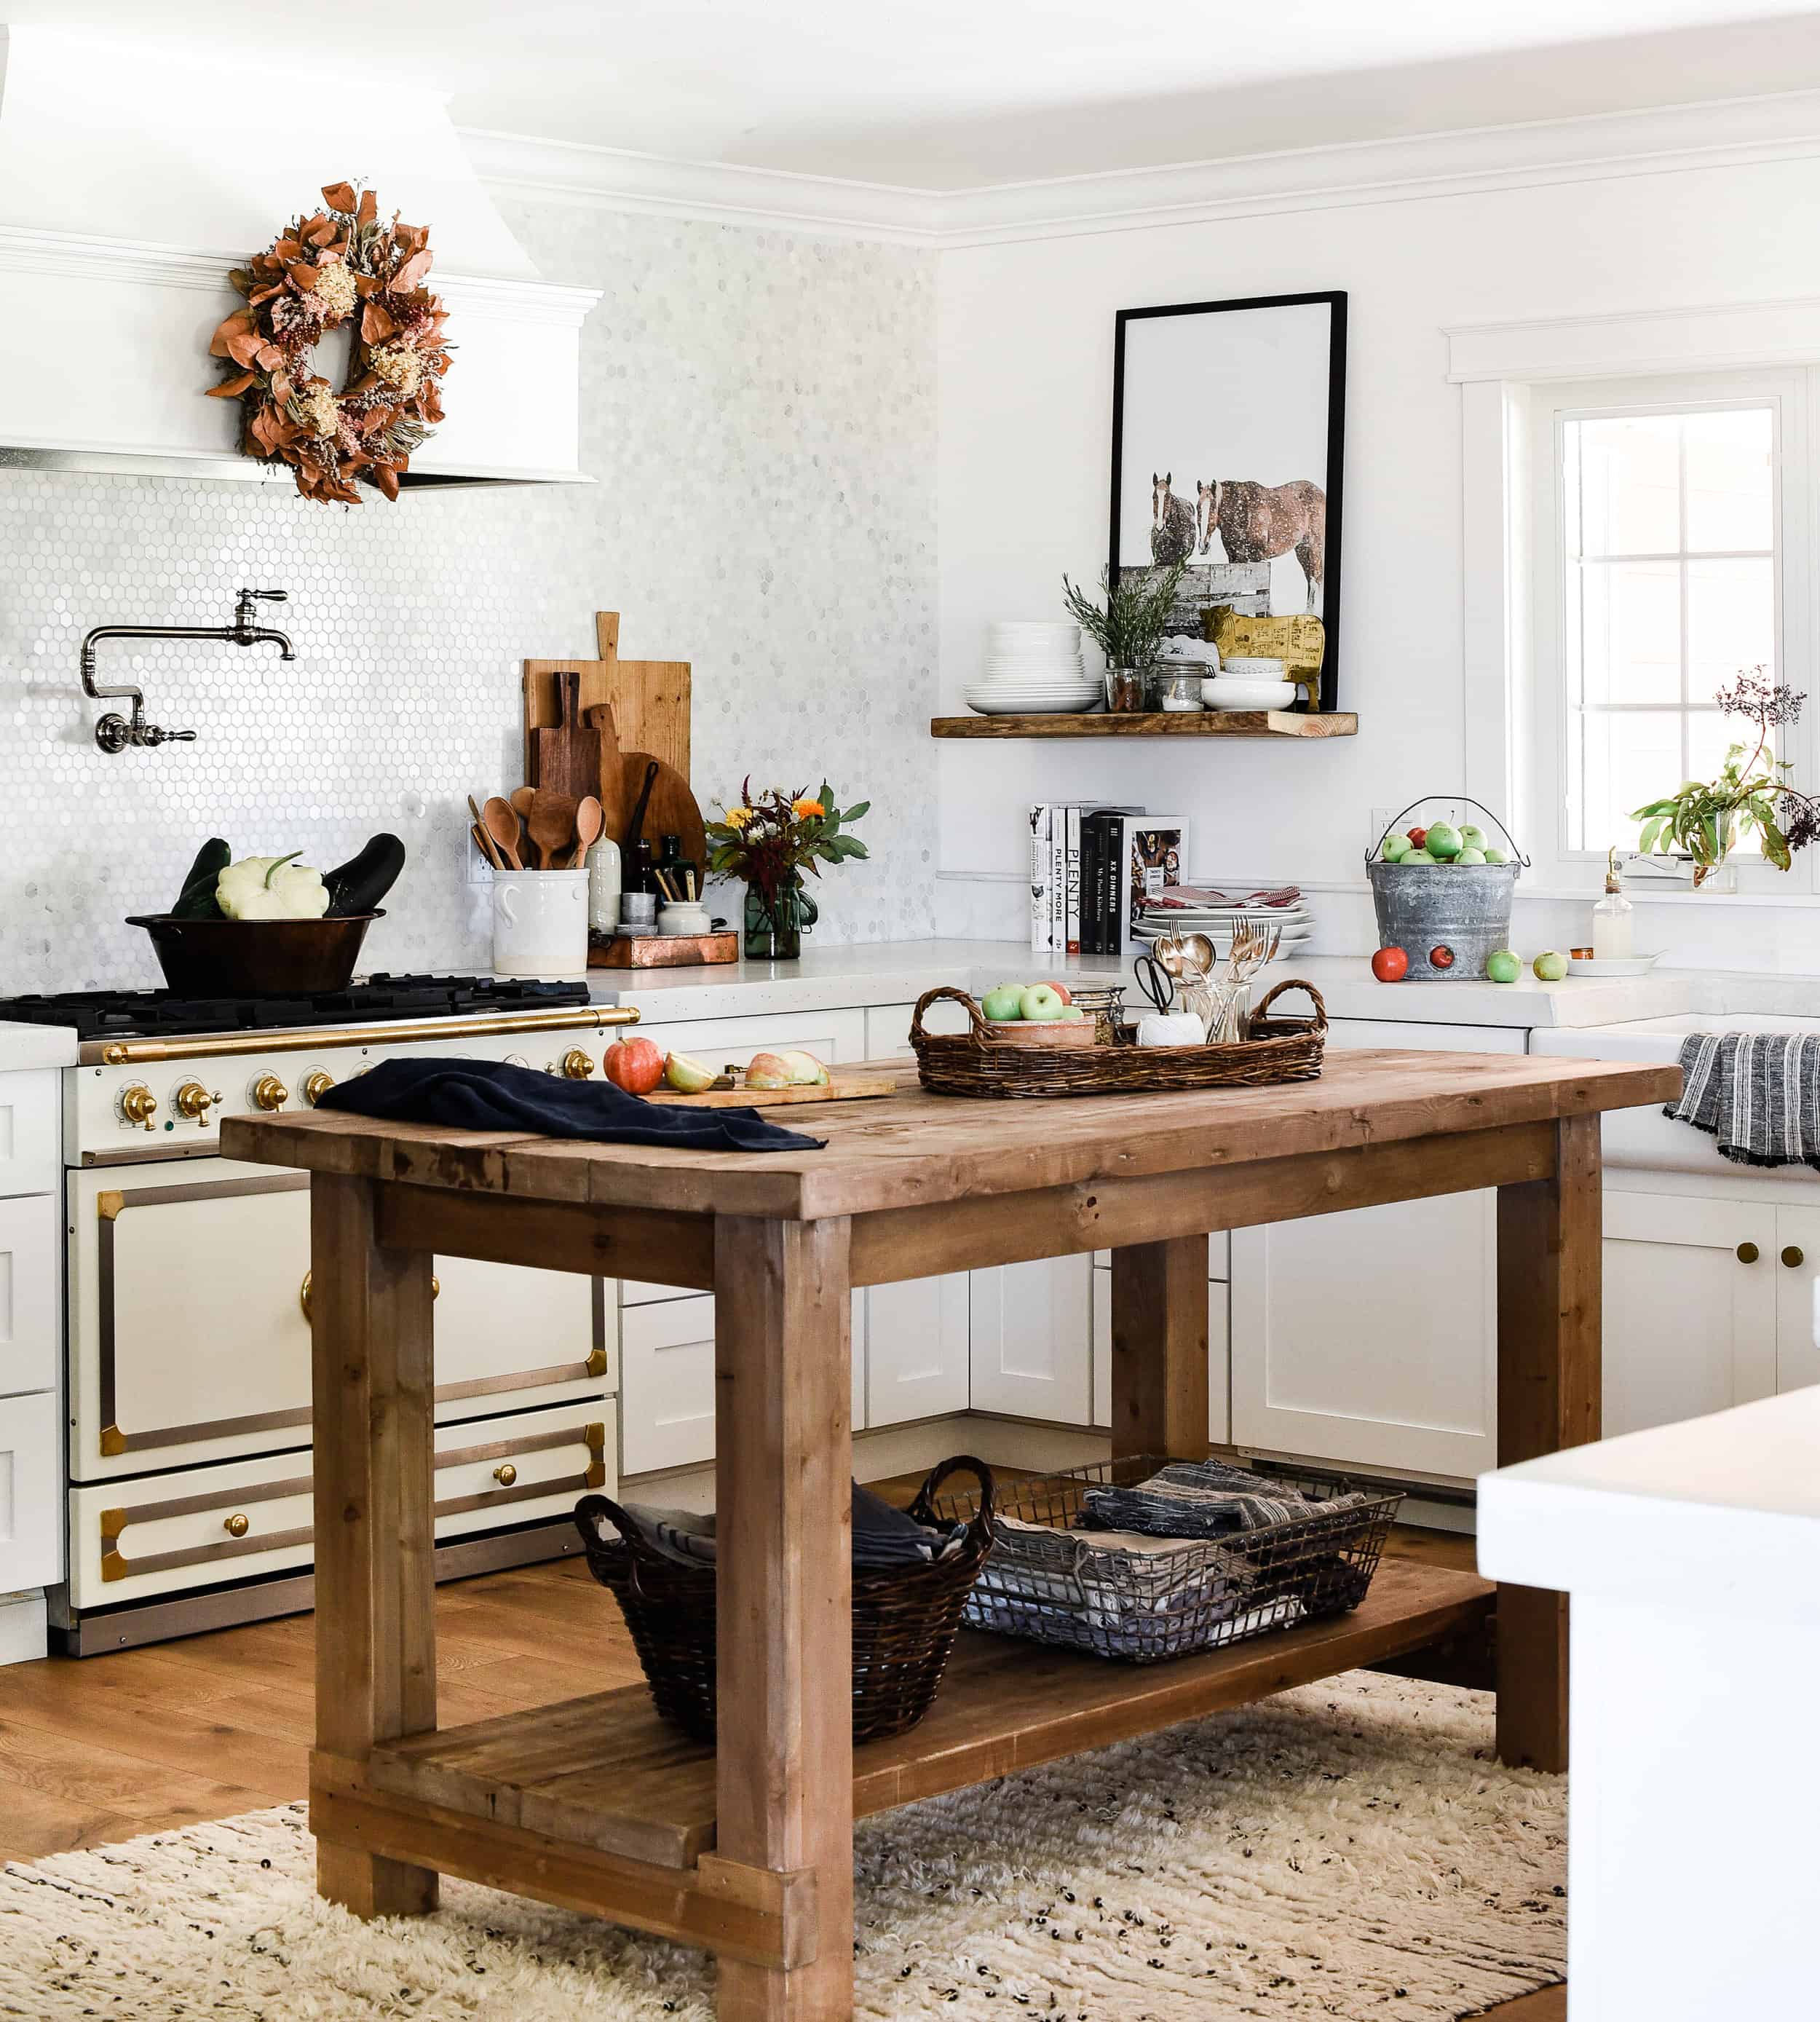 Get inspired to decorate this season with fall decorating ideas from these sixteen beautiful kitchens!